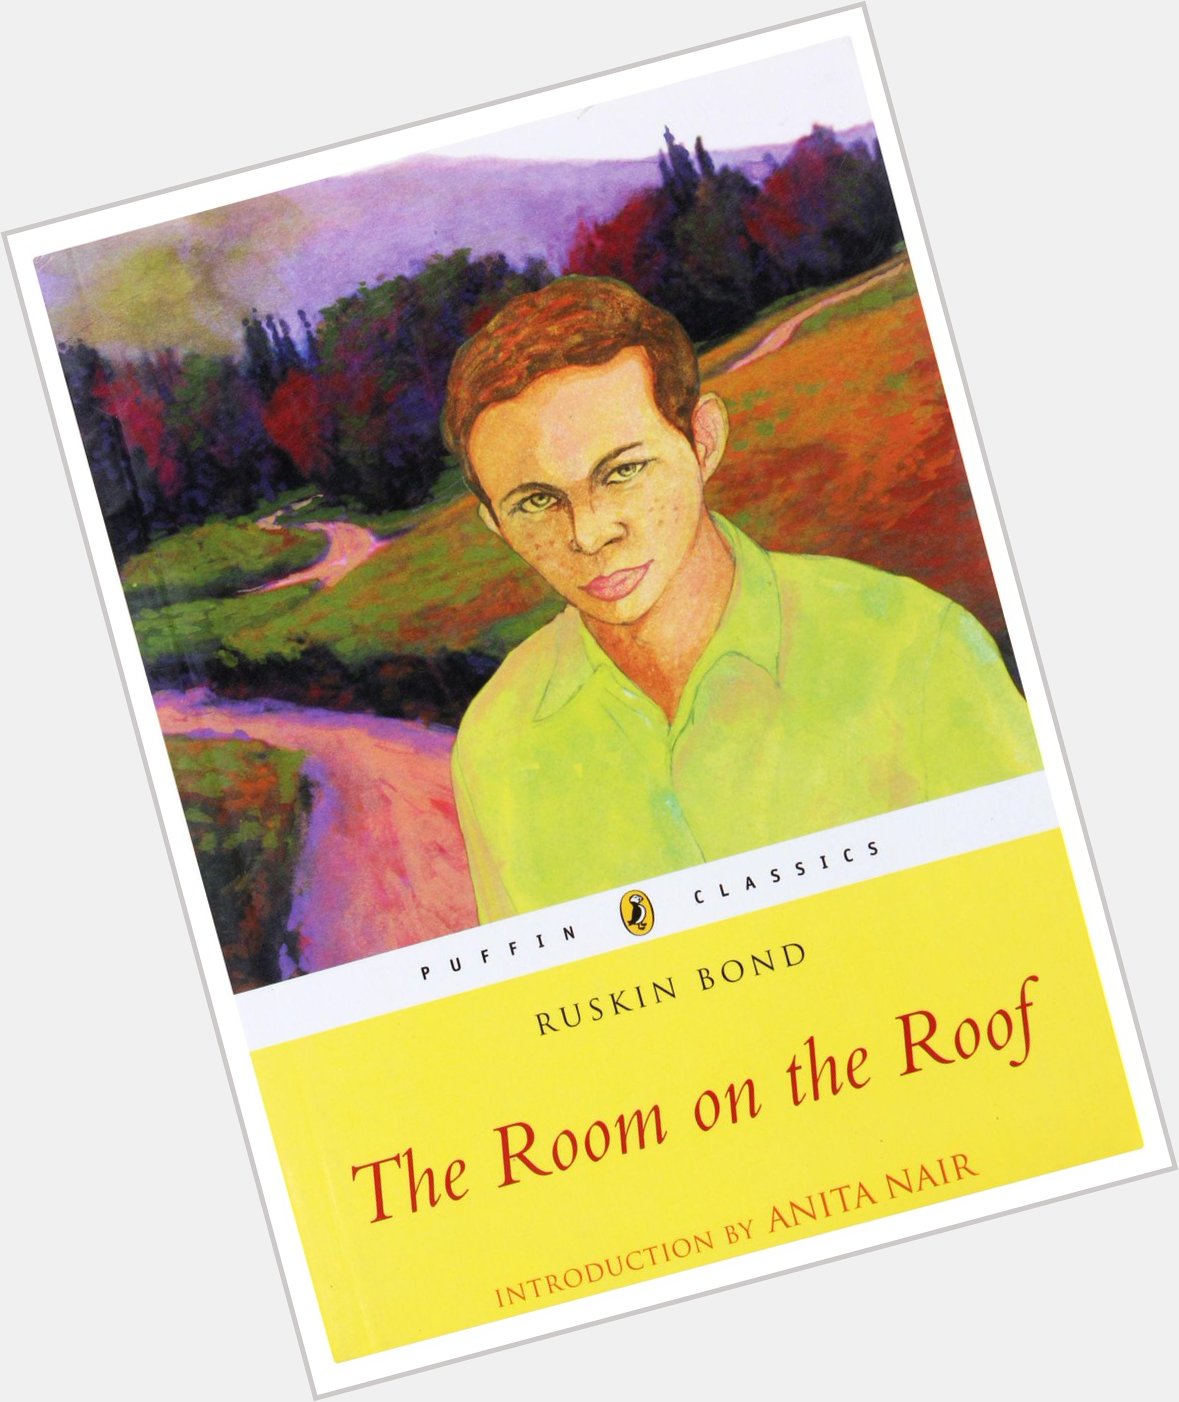 Ruskin Bond turns 81! Happy The undying with the nice old man who lives in the 